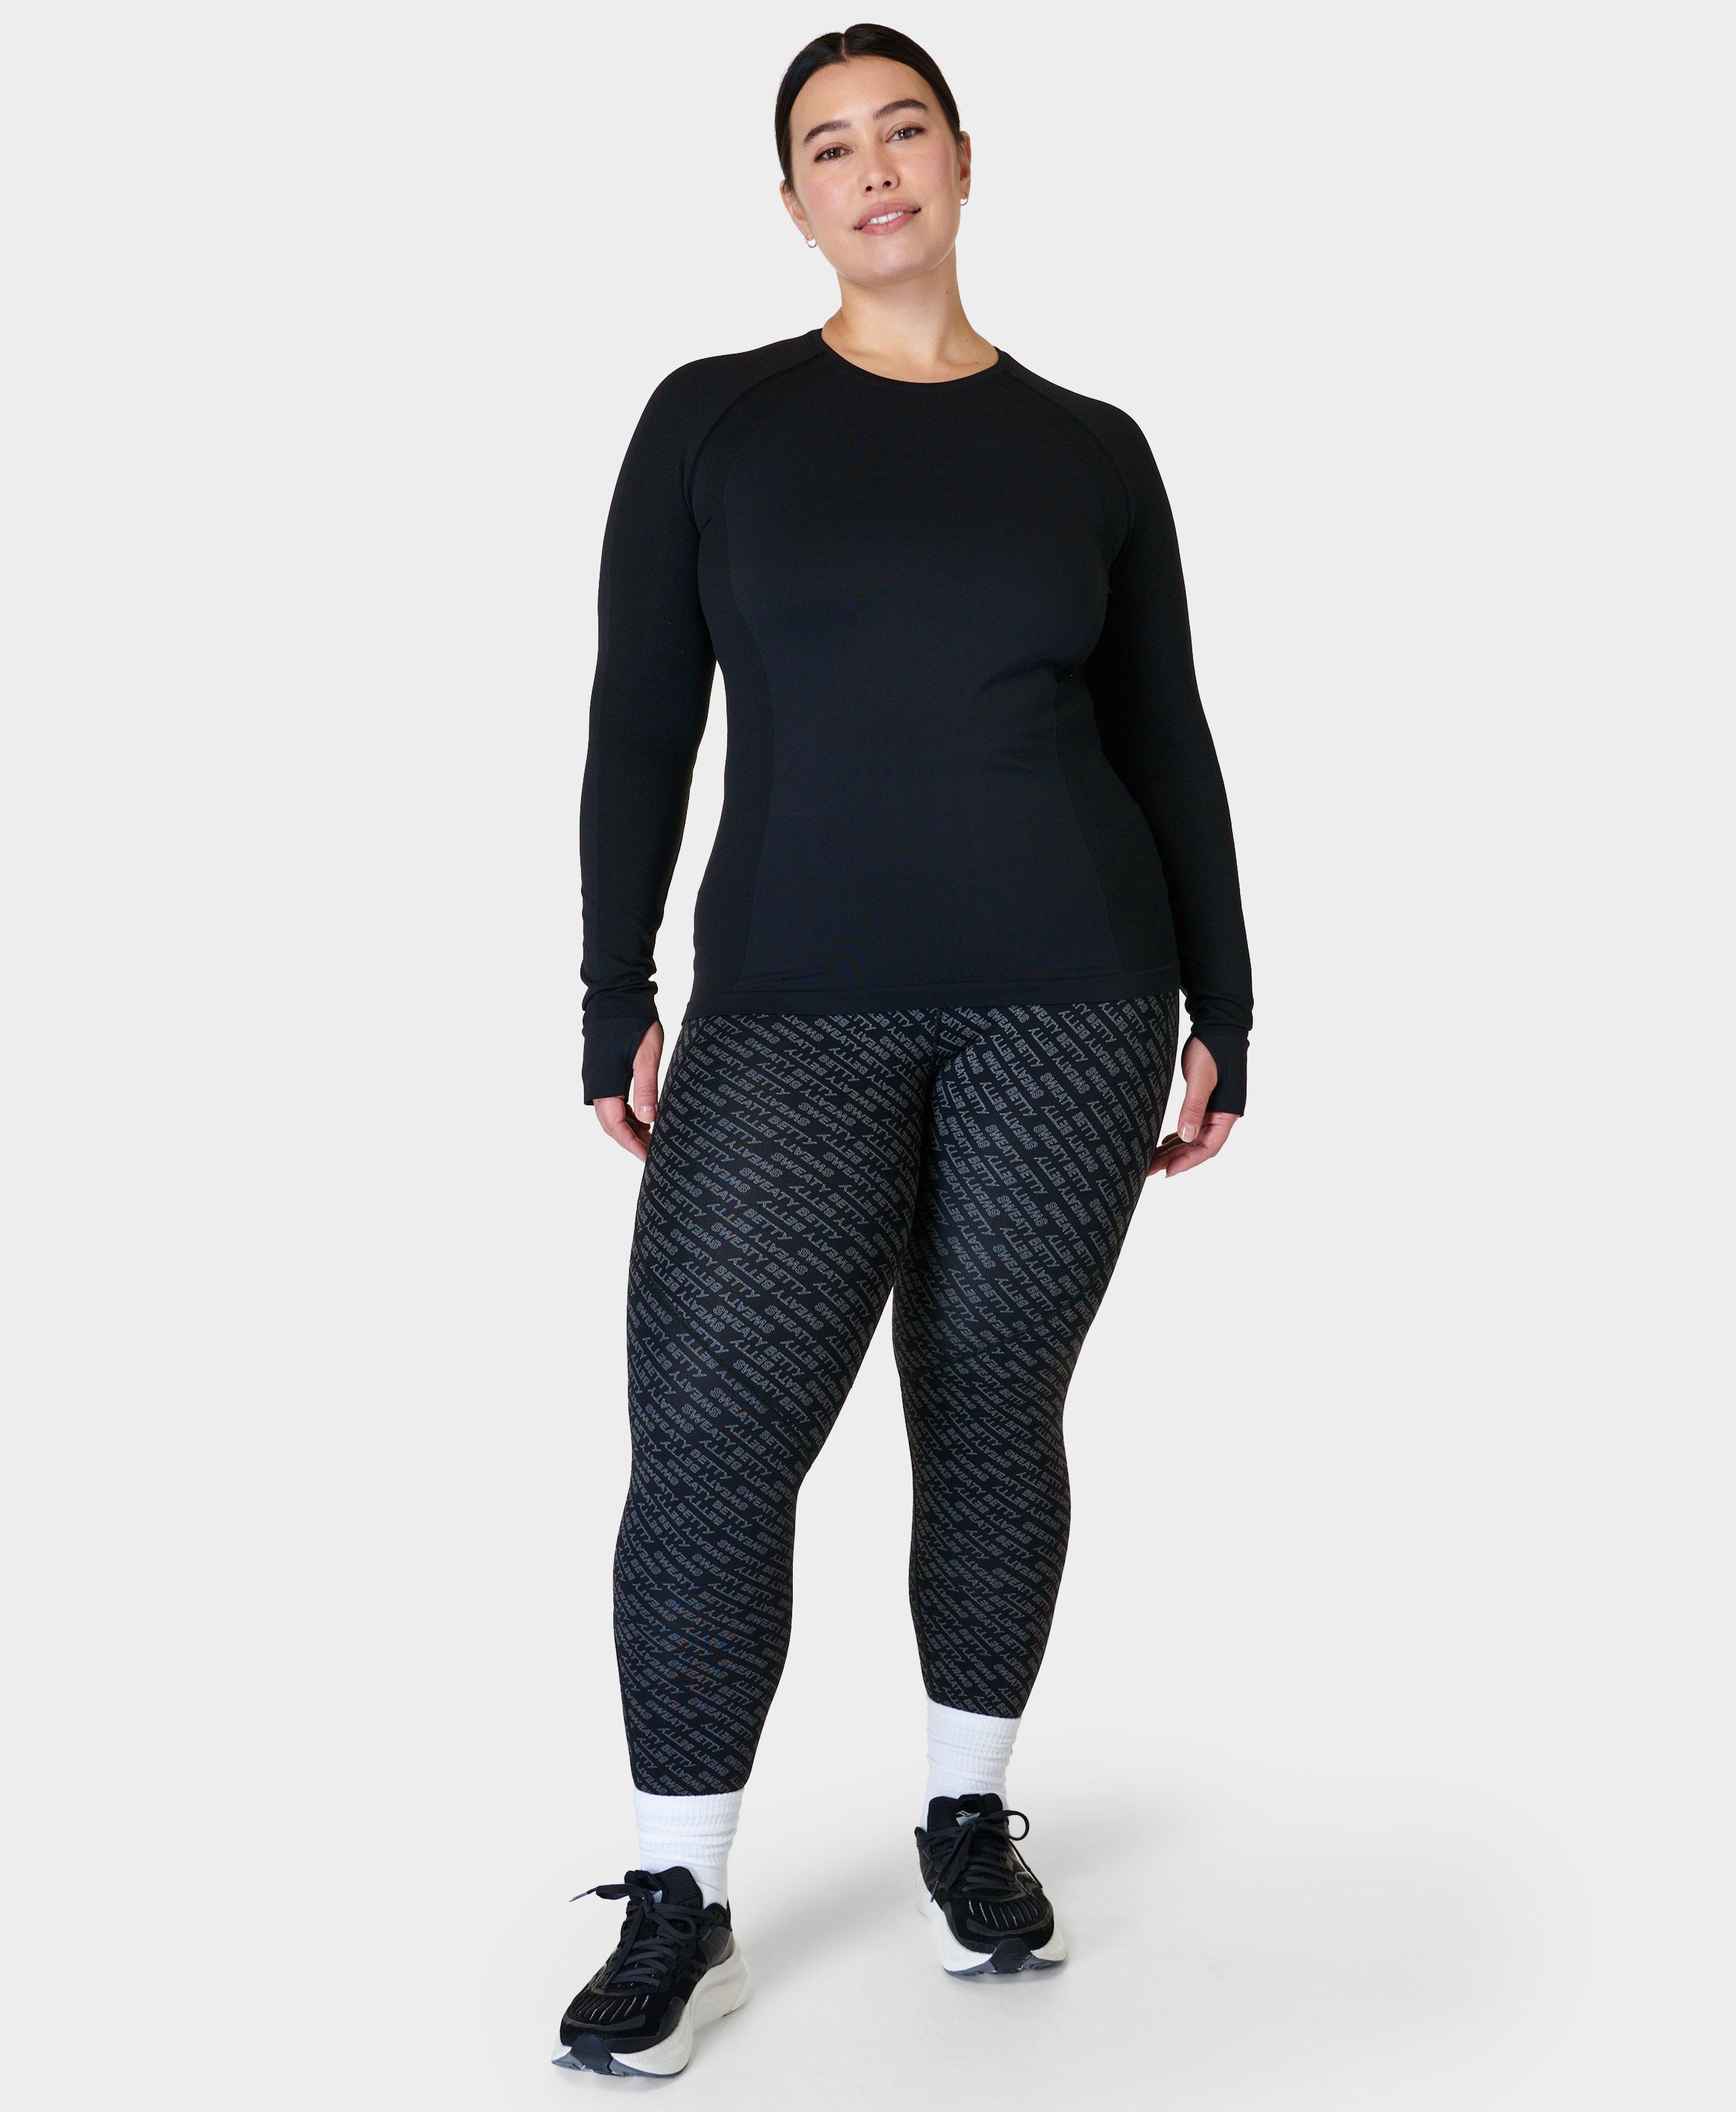 Athlete Seamless Workout Long Sleeve Top - Black, Women's Base Layers &  Long Sleeve Tops